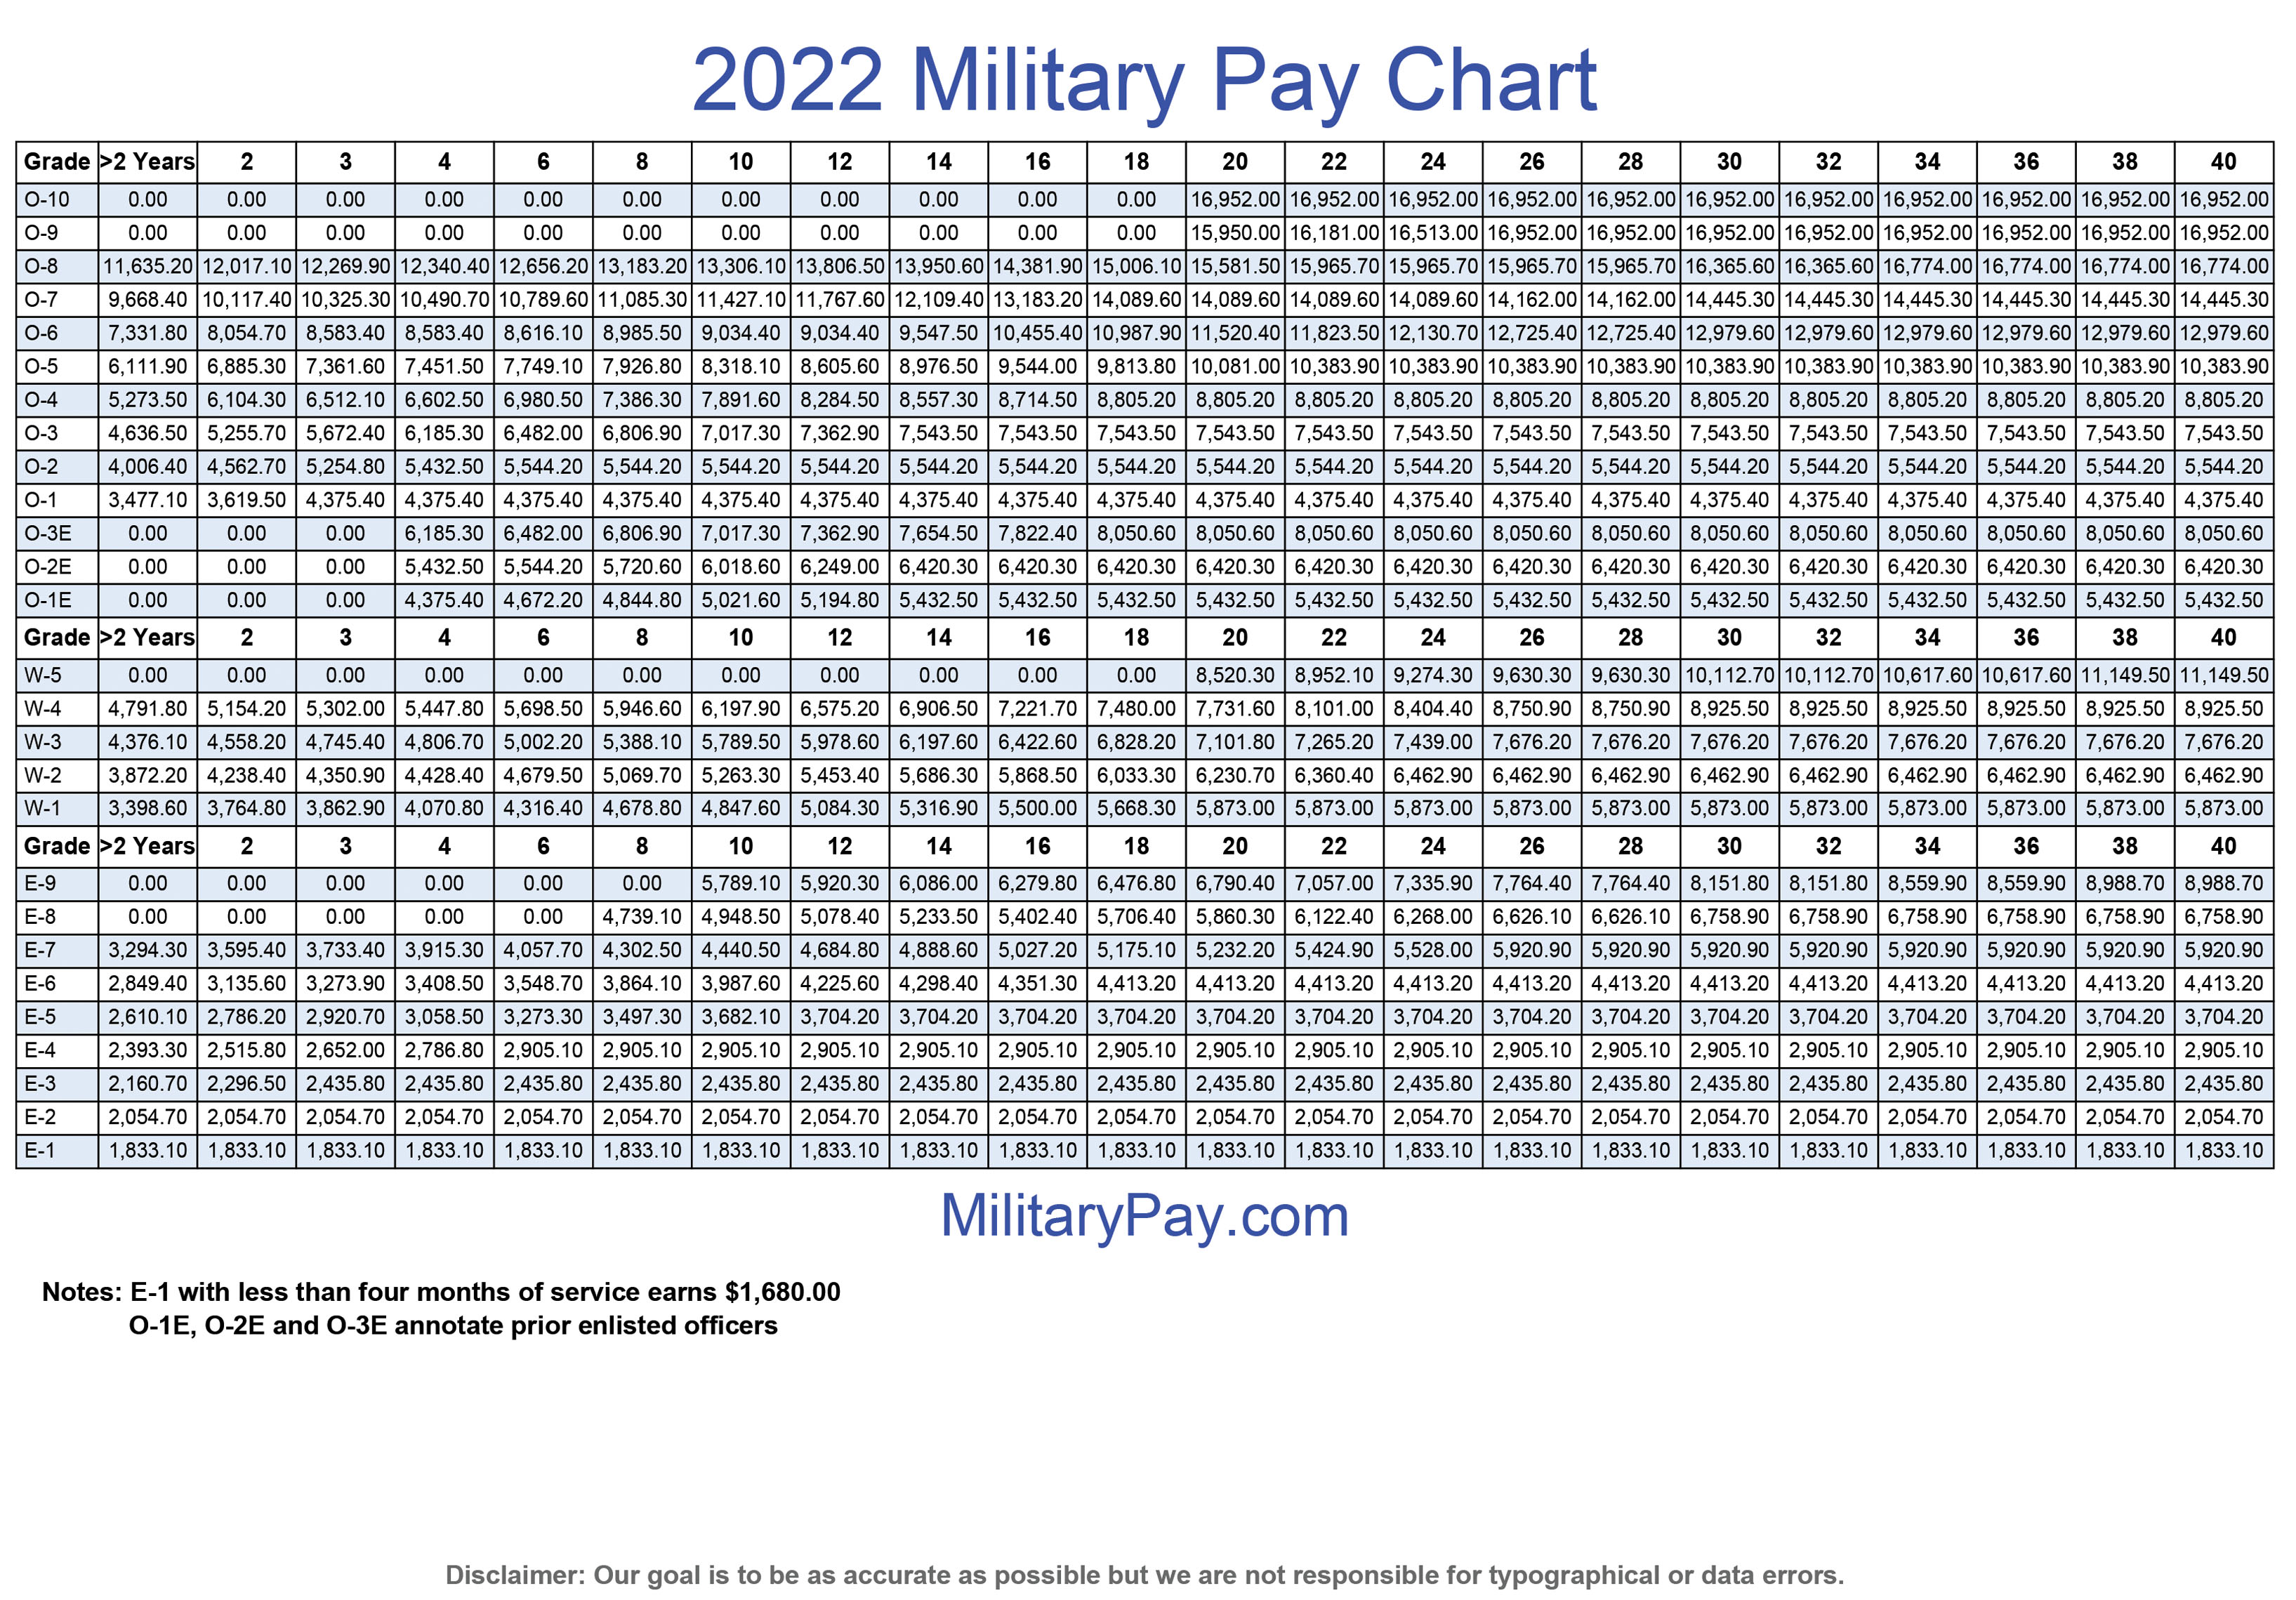 2022 Military Pay Scale 40 Year Version 